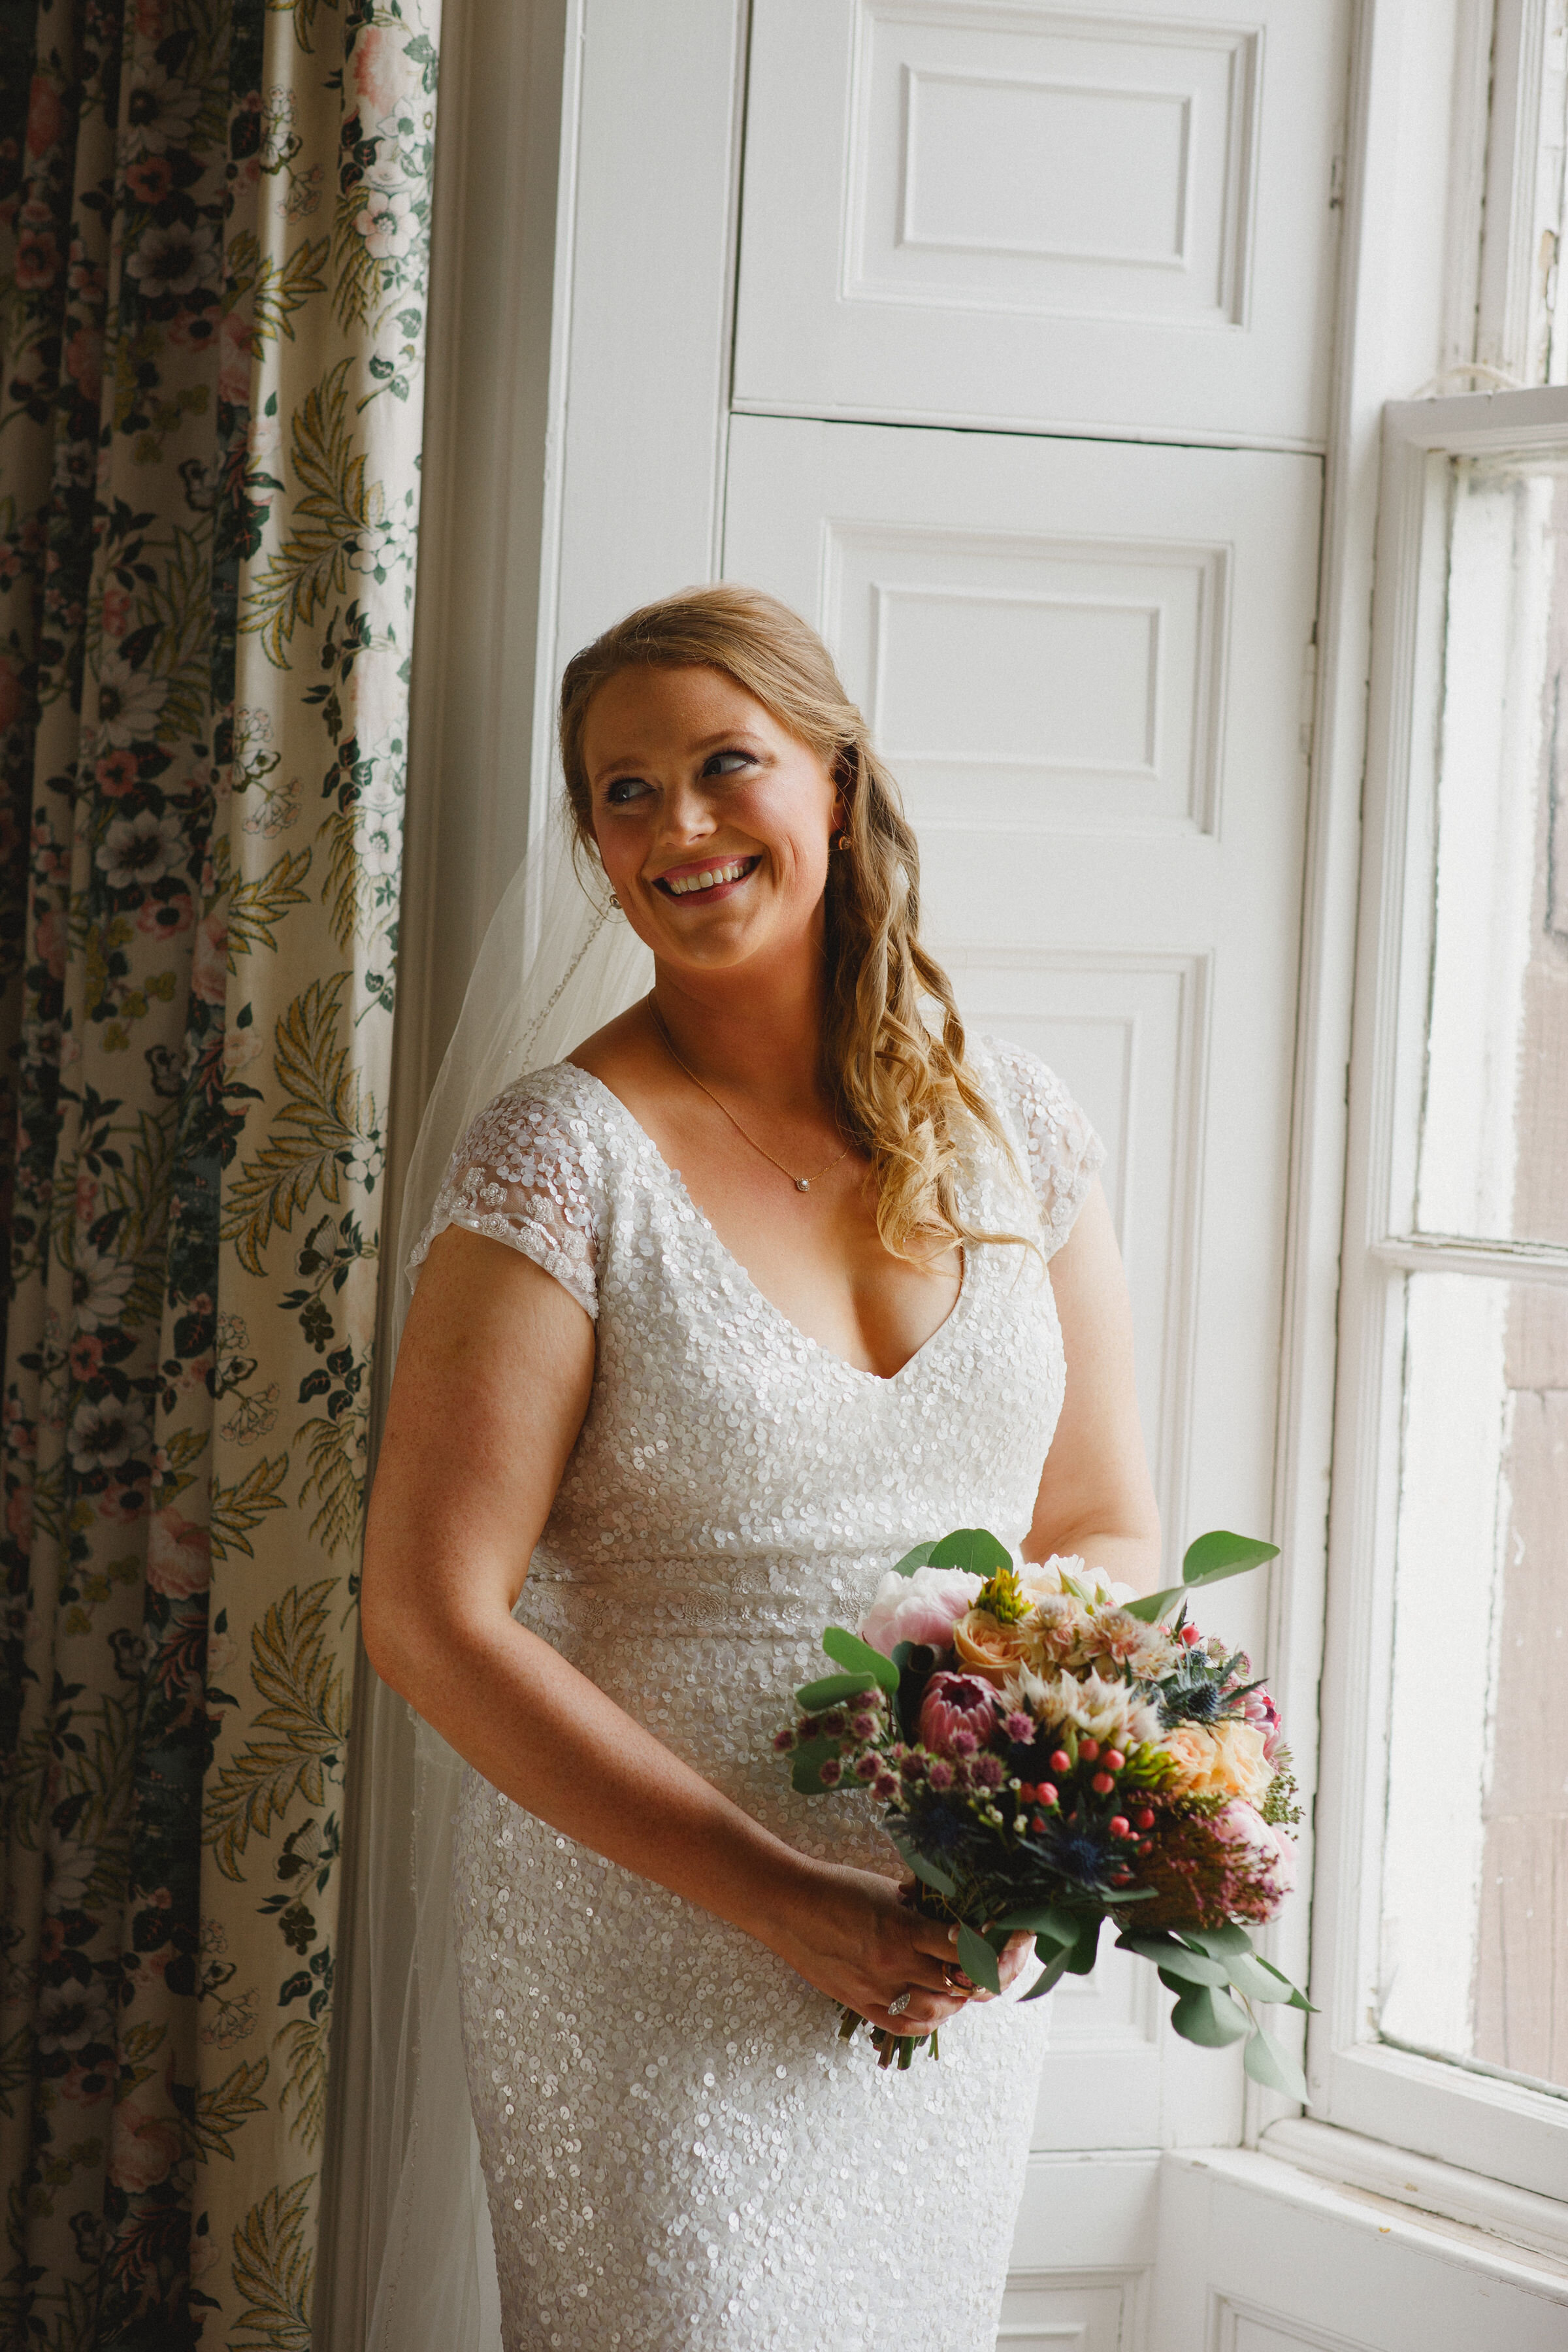 Bride standing next to window holding her bouquet at Strathallan Castle, Perthshire